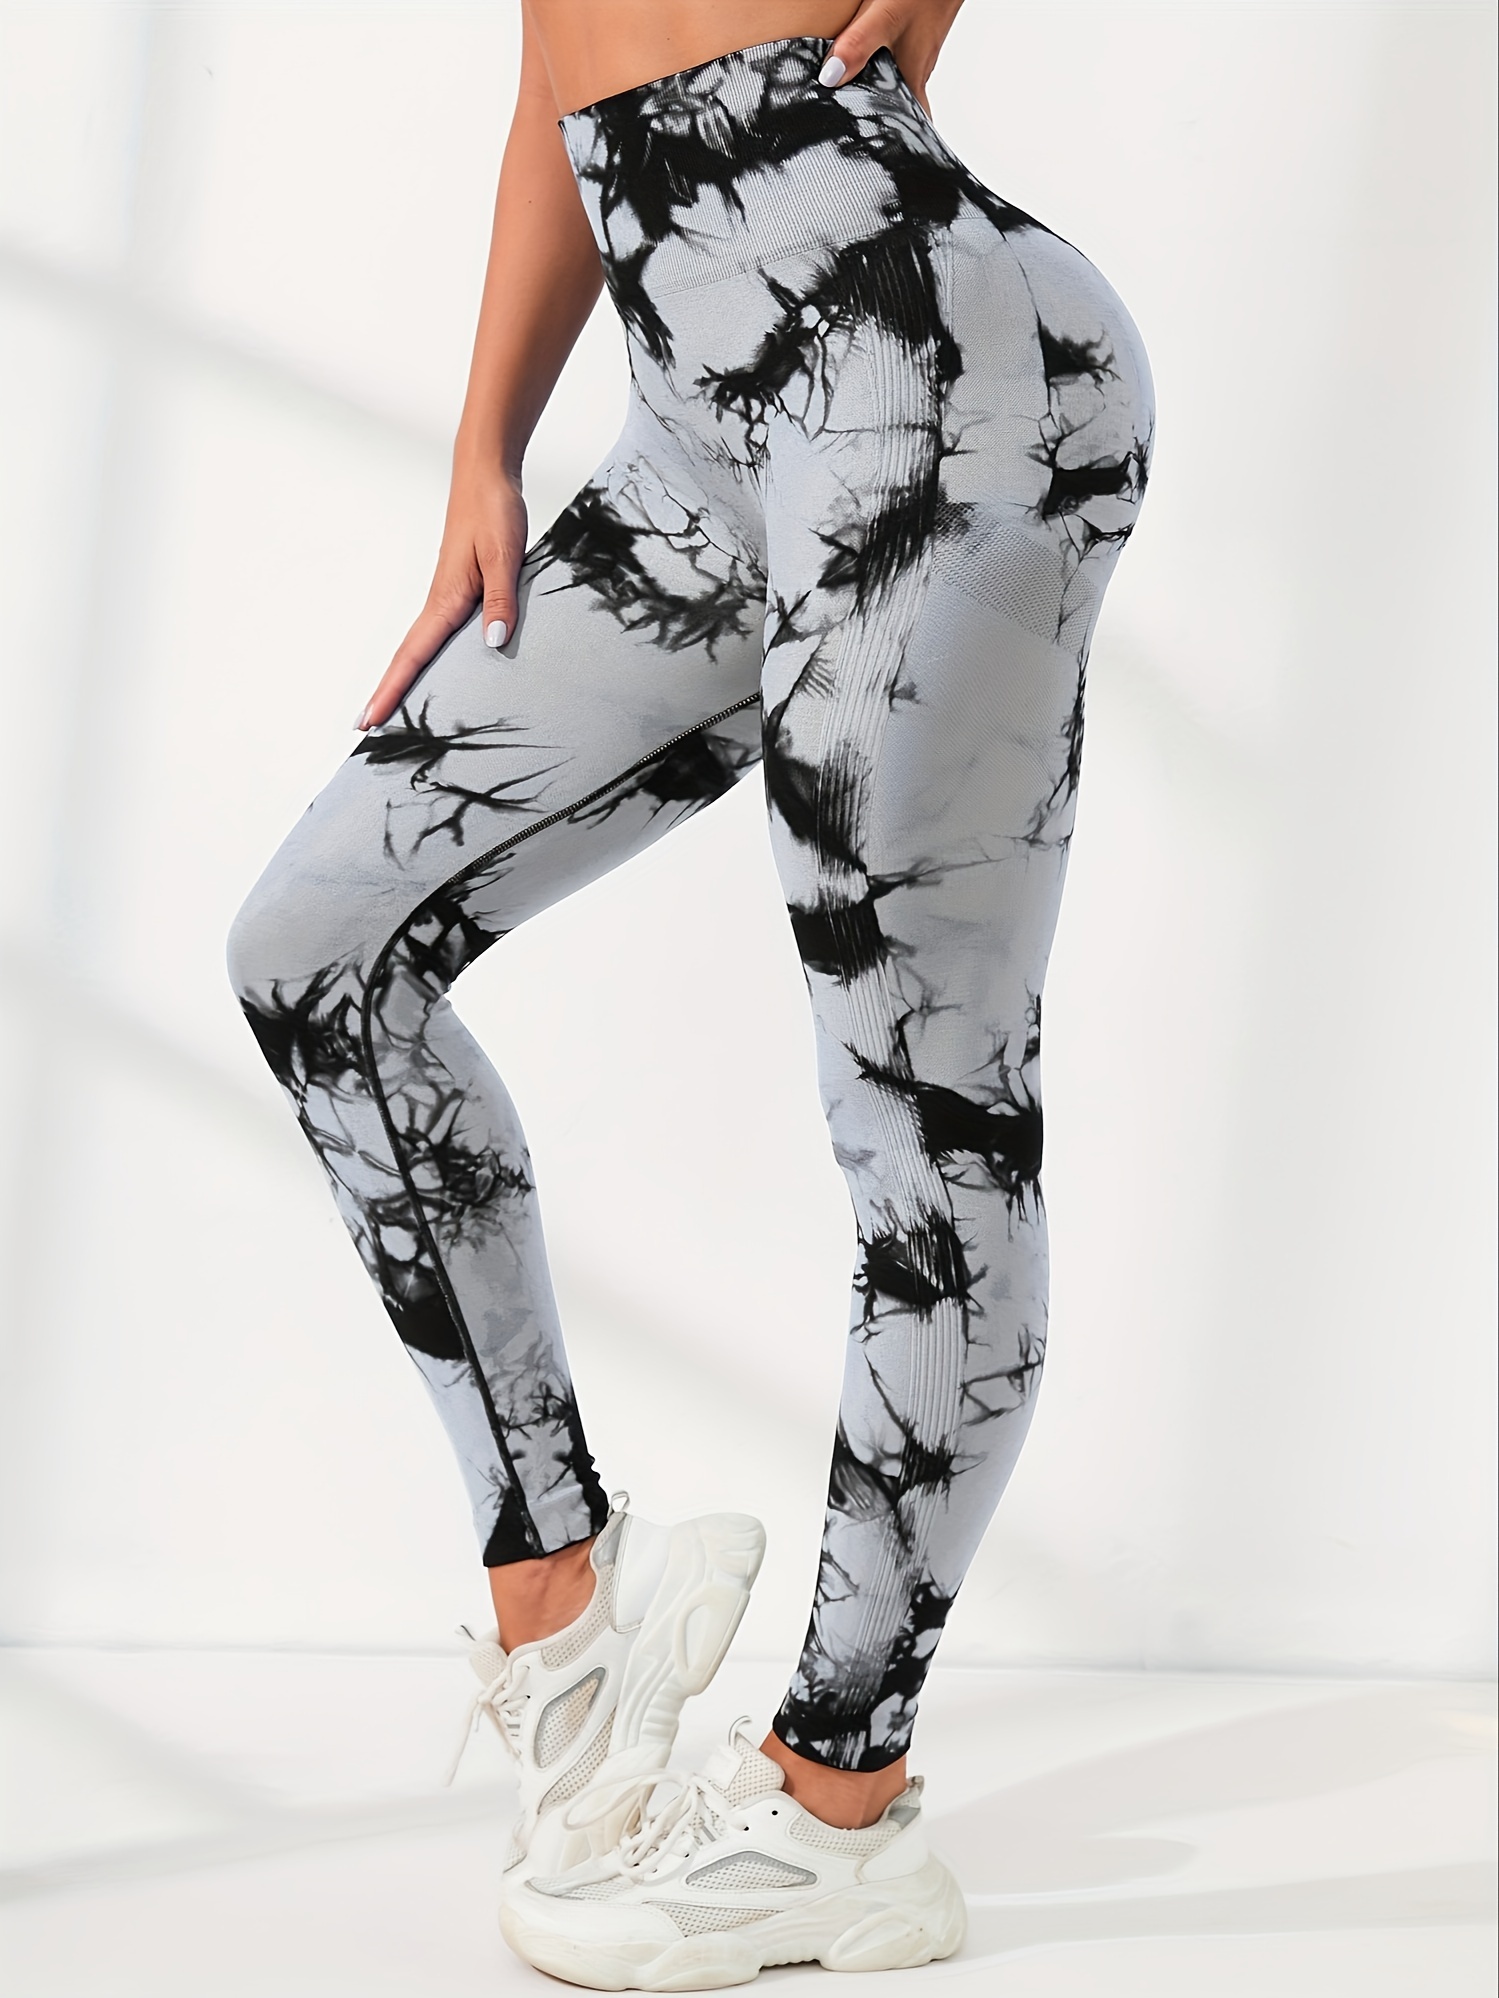 The Balance Collection Leggings Small White Gray Marble Yoga Activewear